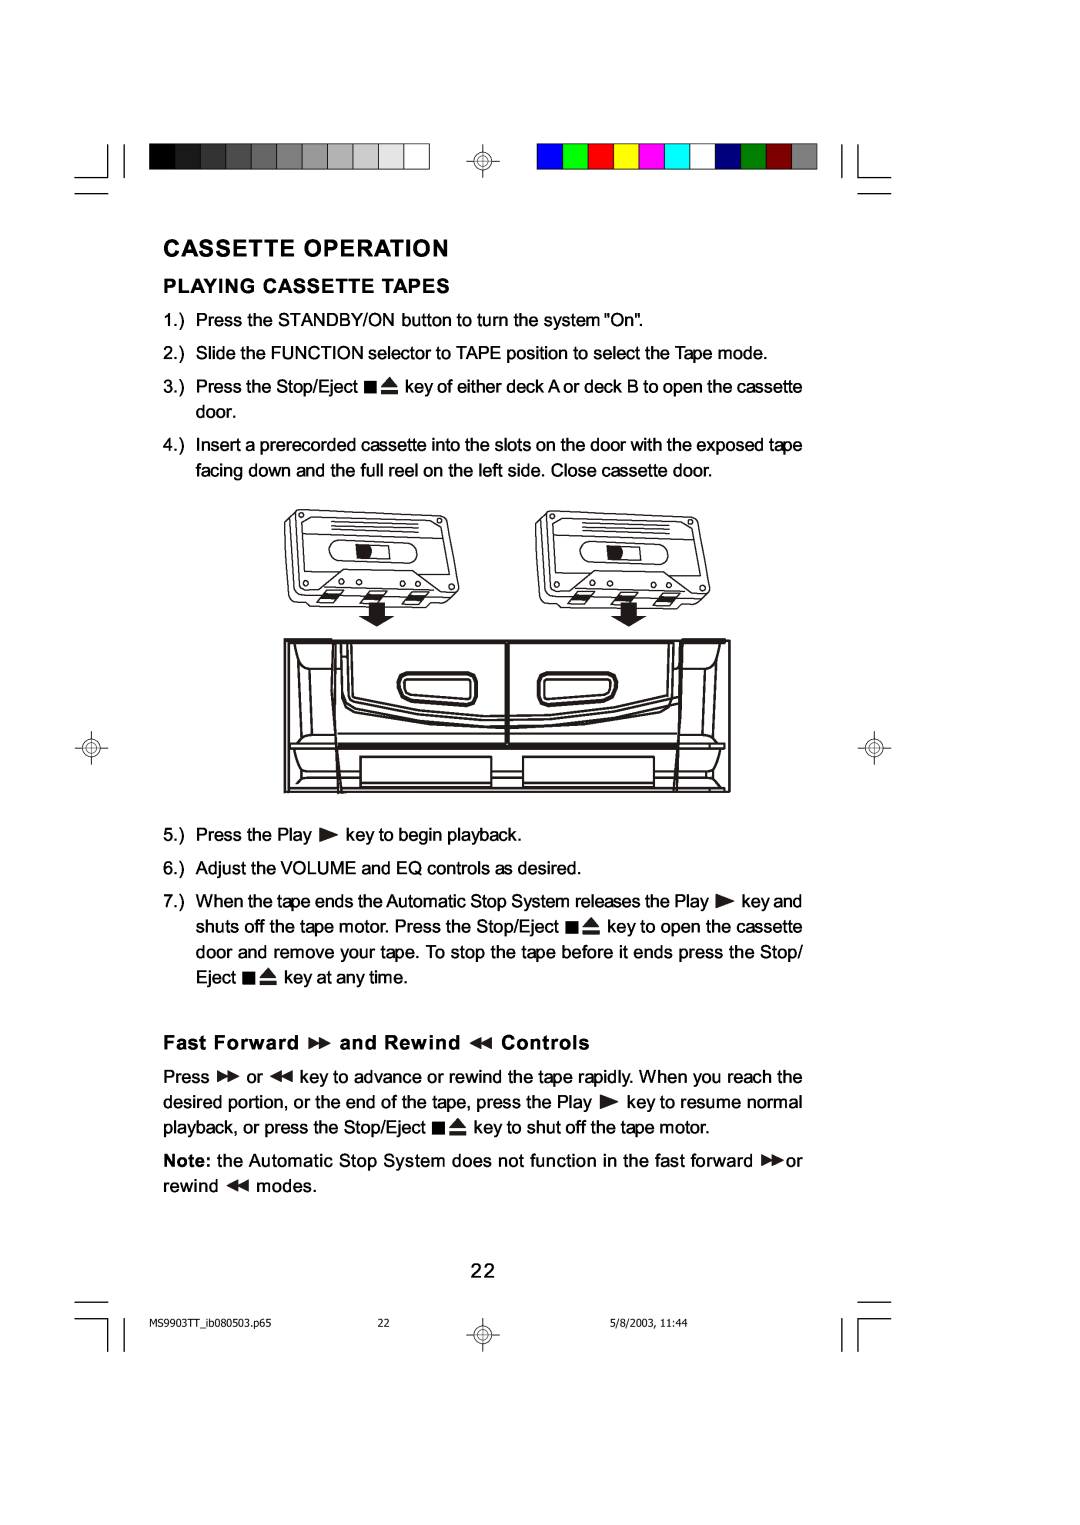 Emerson MS9904TTC owner manual Cassette Operation, Playing Cassette Tapes, Fast Forward and Rewind Controls 